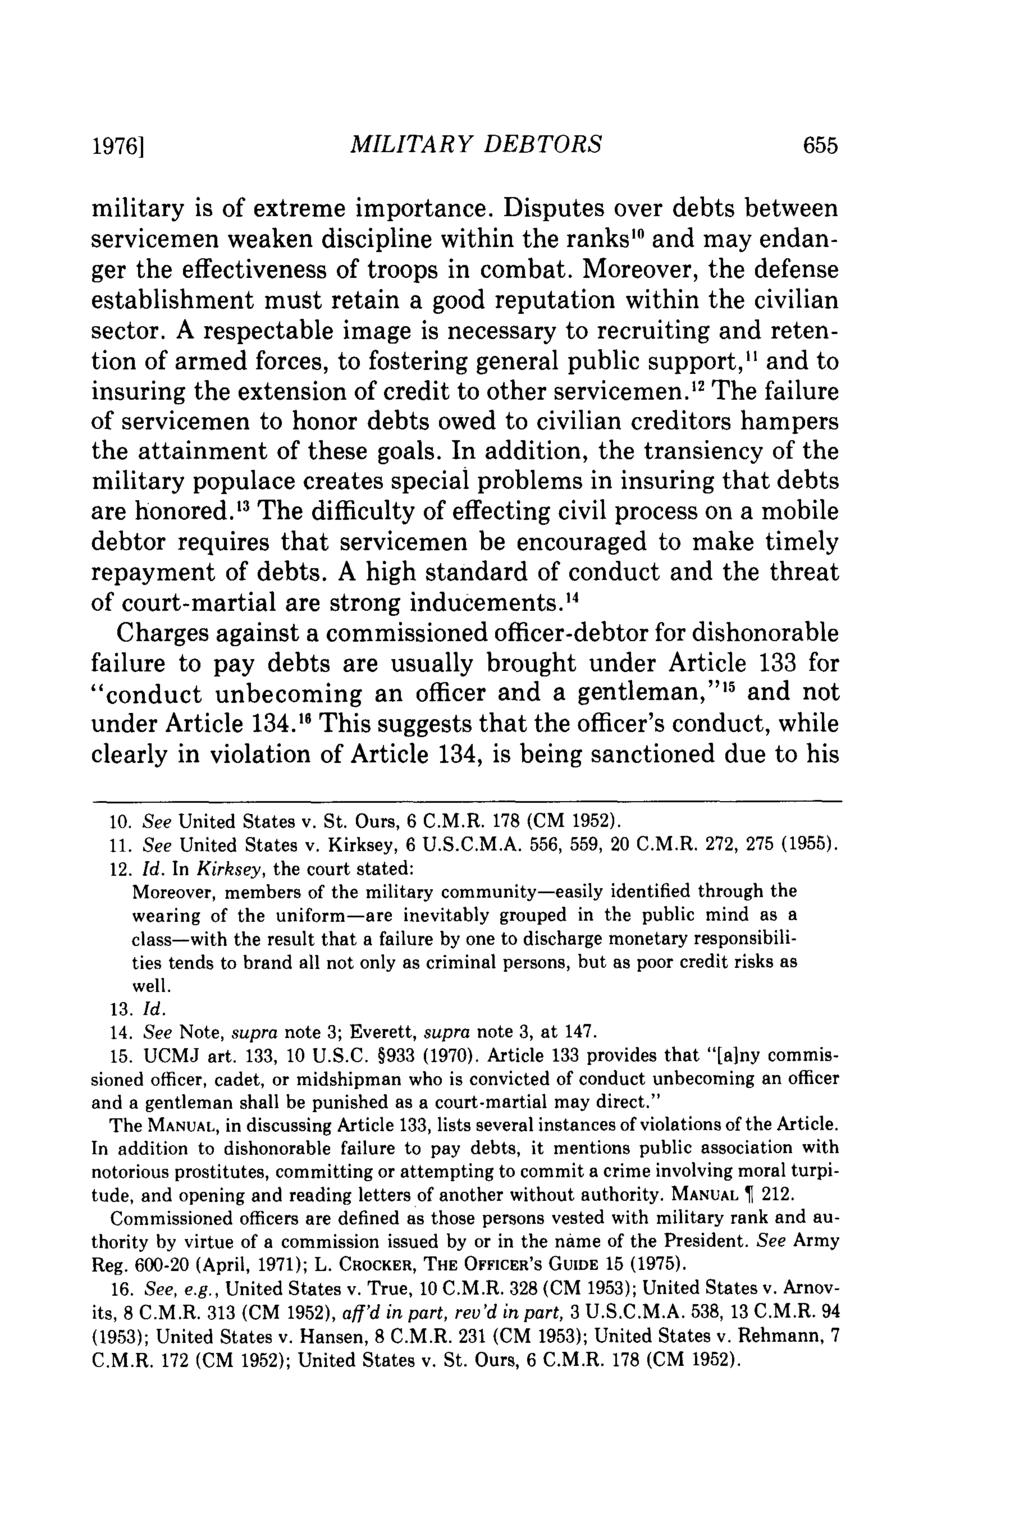 1976] MILITARY DEBTORS military is of extreme importance. Disputes over debts between servicemen weaken discipline within the ranks l " and may endanger the effectiveness of troops in combat.